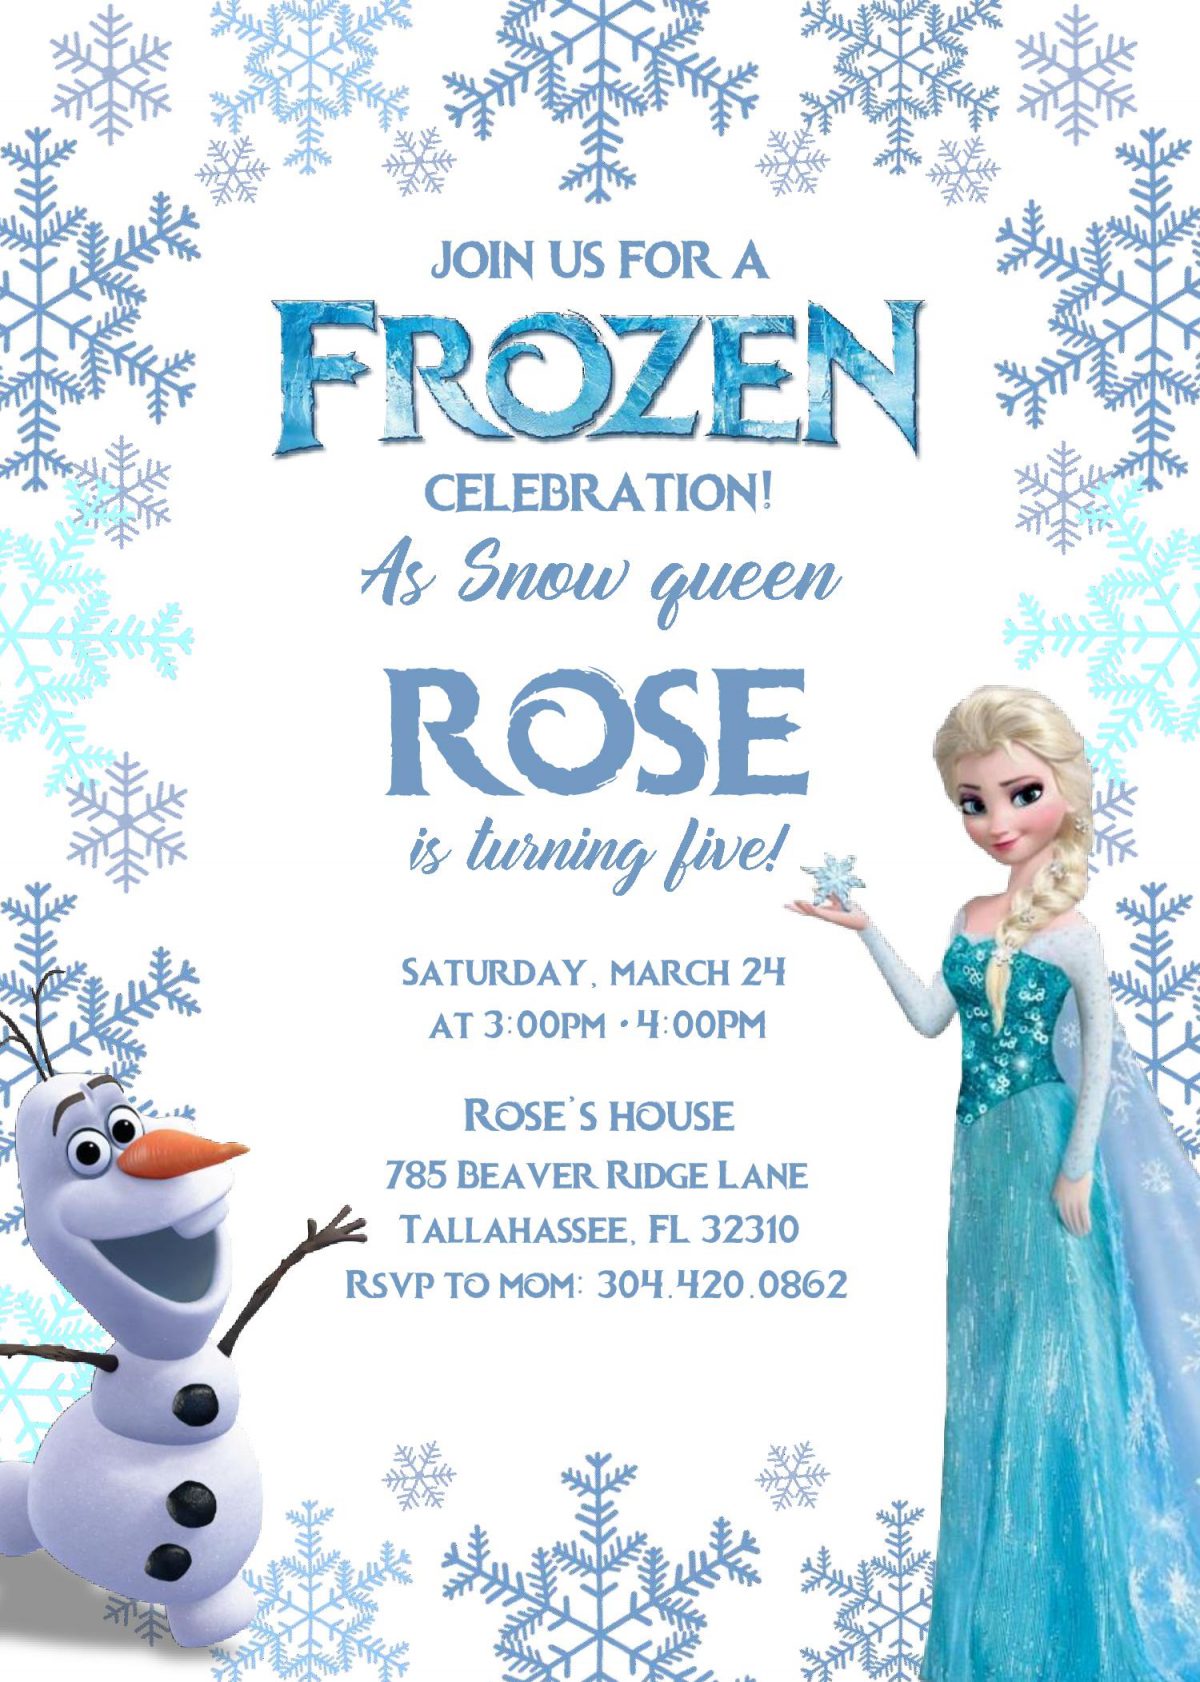 Frozen Invitation Templates - Editable With MS Word and has snowflakes background